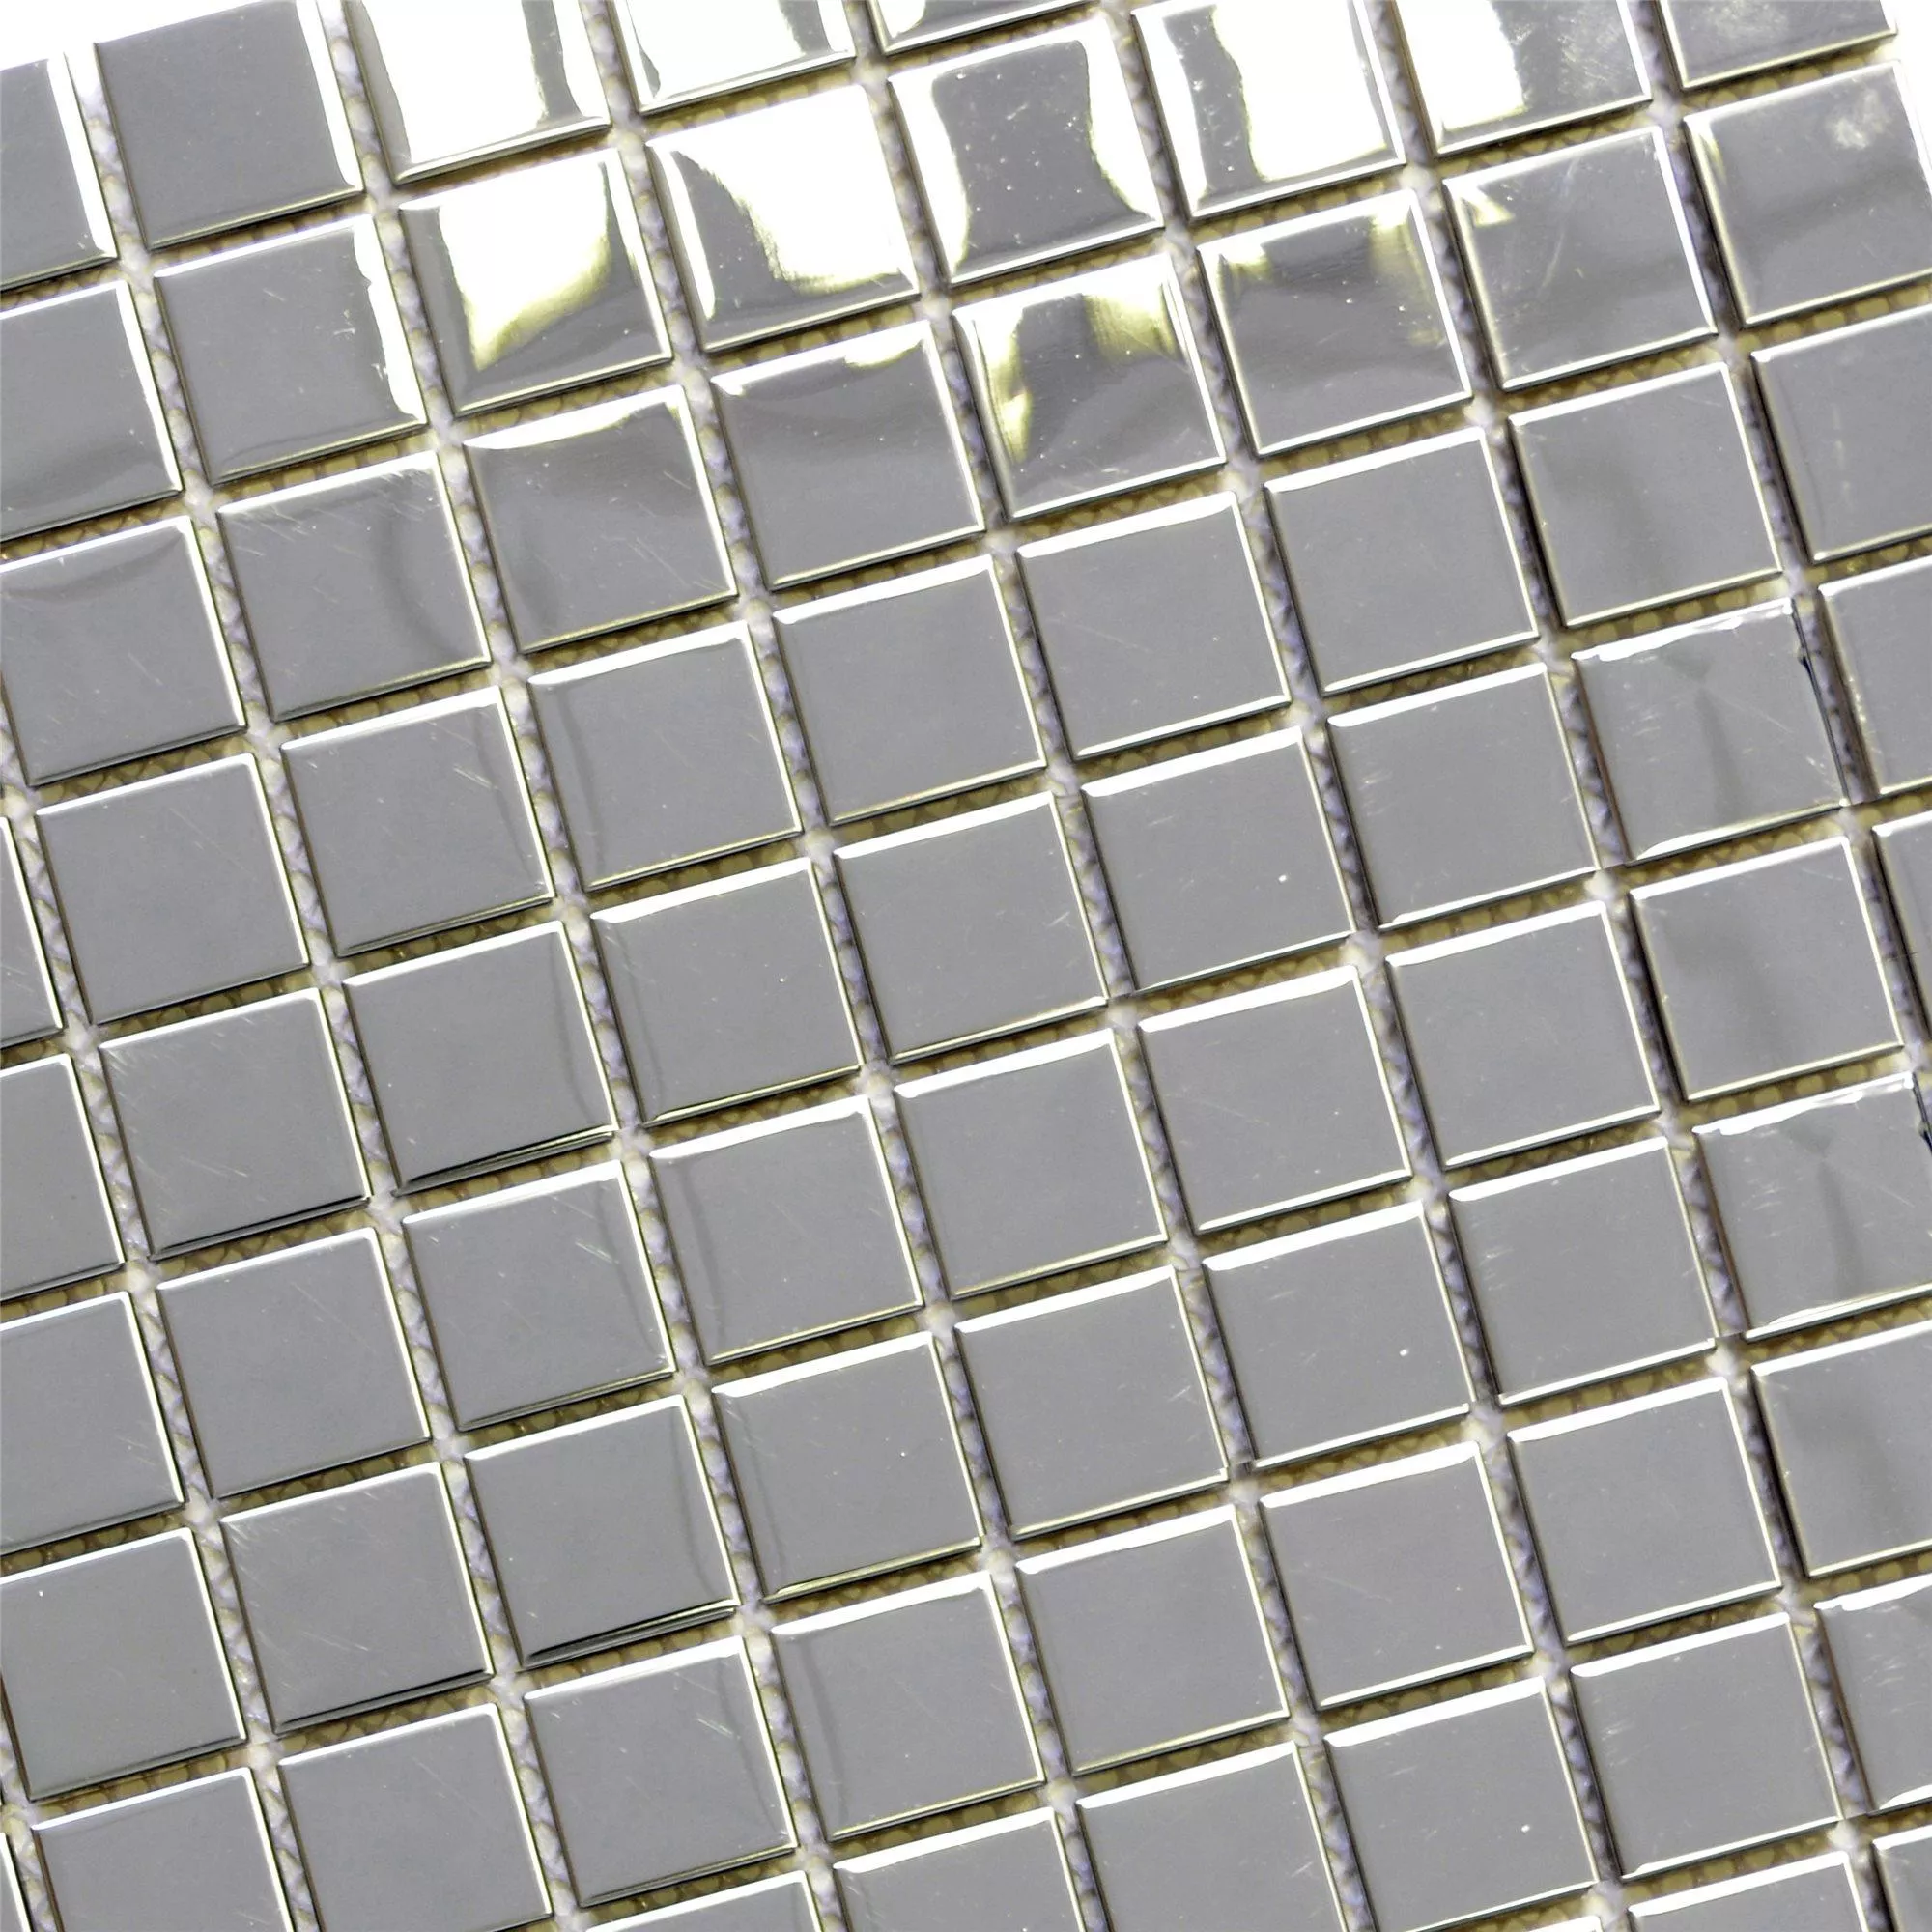 Stainless Steel Mosaic Tiles Magnet Glossy Square 23